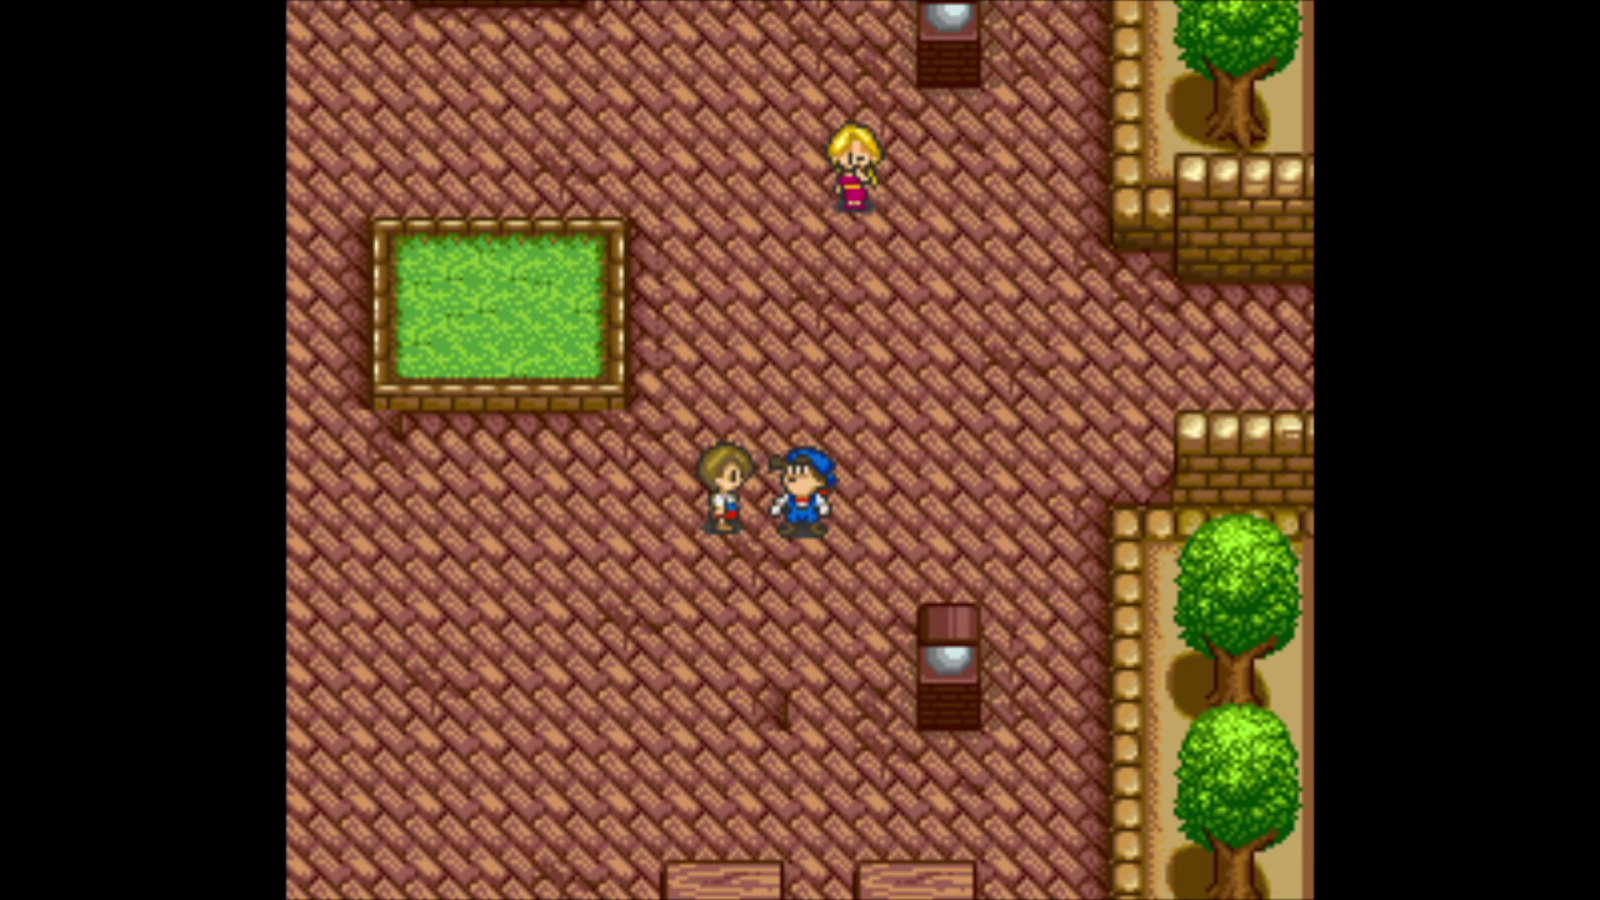 There's enough of me to go around, ladies. | Harvest Moon SNES